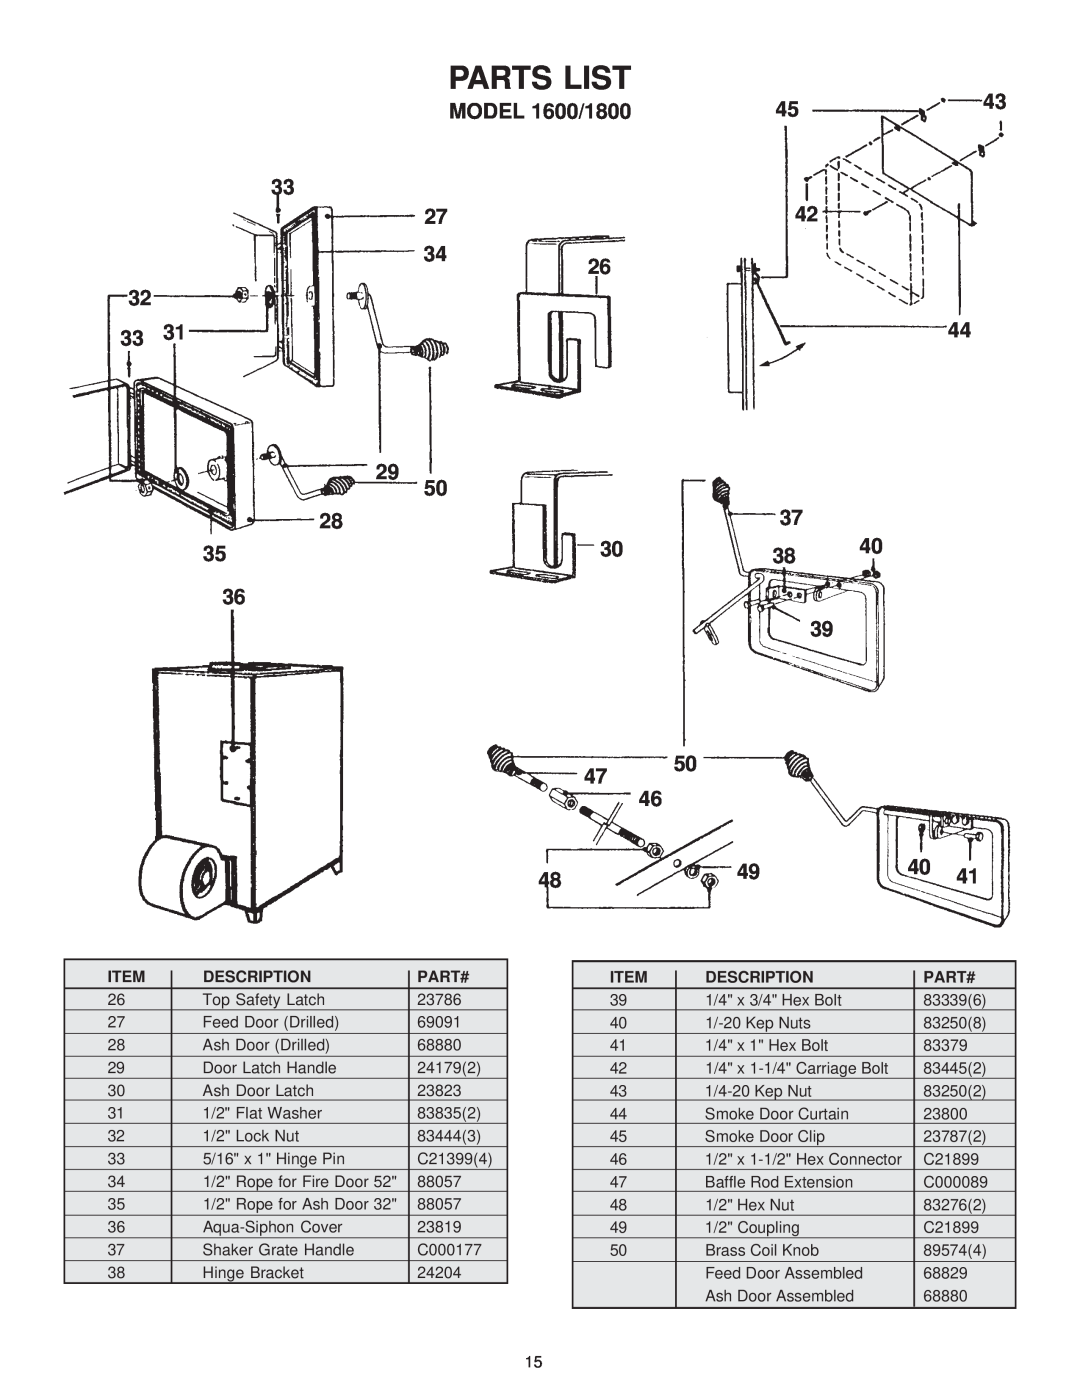 United States Stove manual Parts List, MODEL 1600/1800 